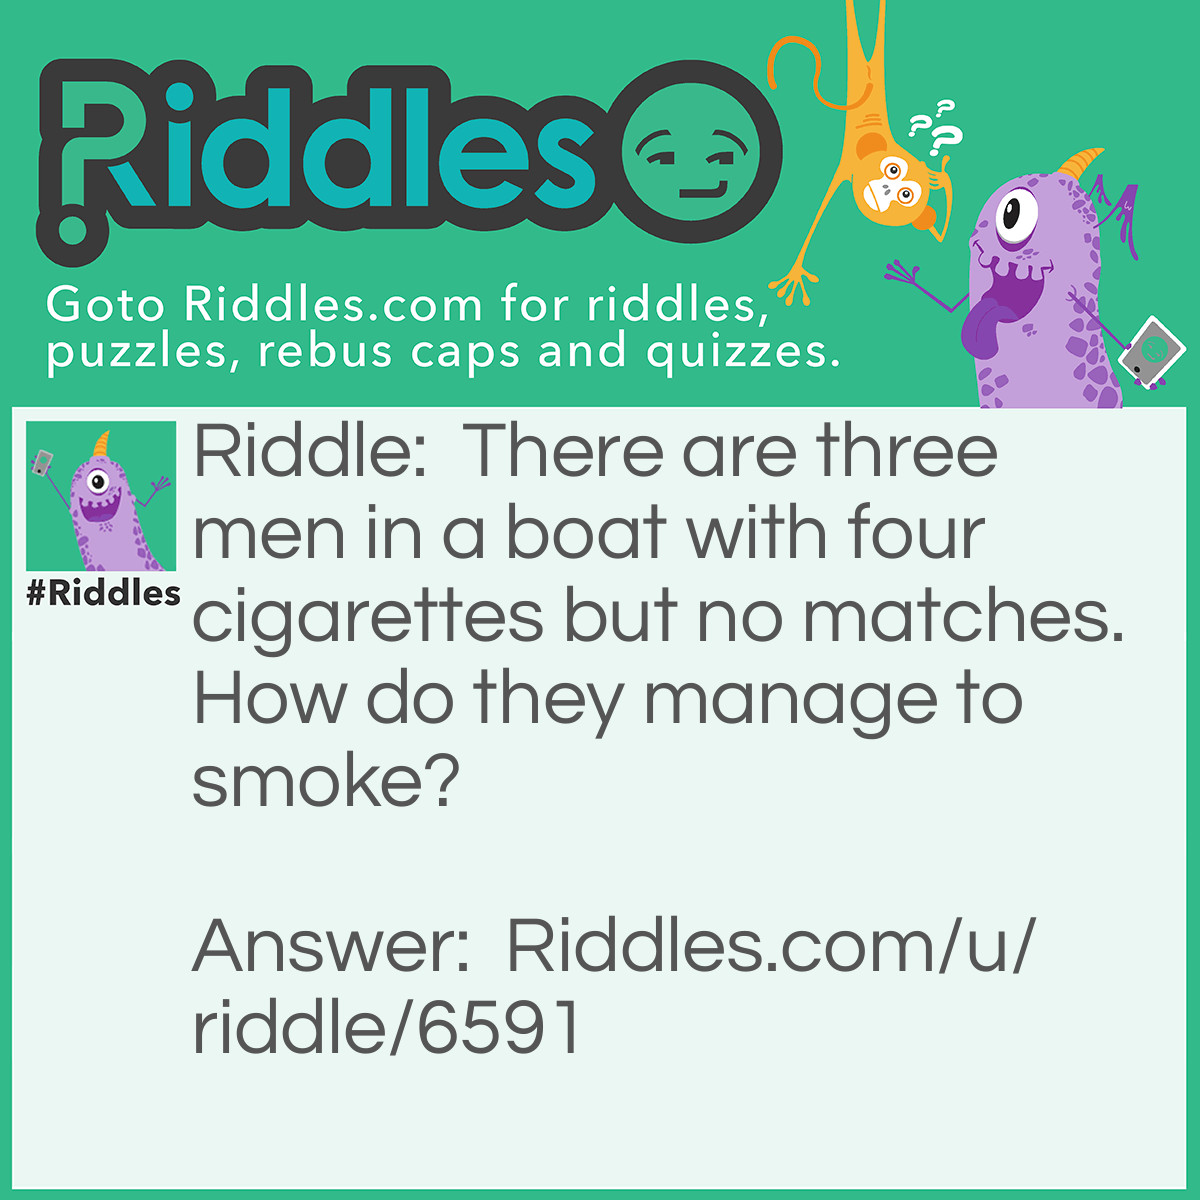 Riddle: There are three men in a boat with four cigarettes but no matches. How do they manage to smoke? Answer: They threw a cigarette overboard, and made the boat a cigarette lighter.